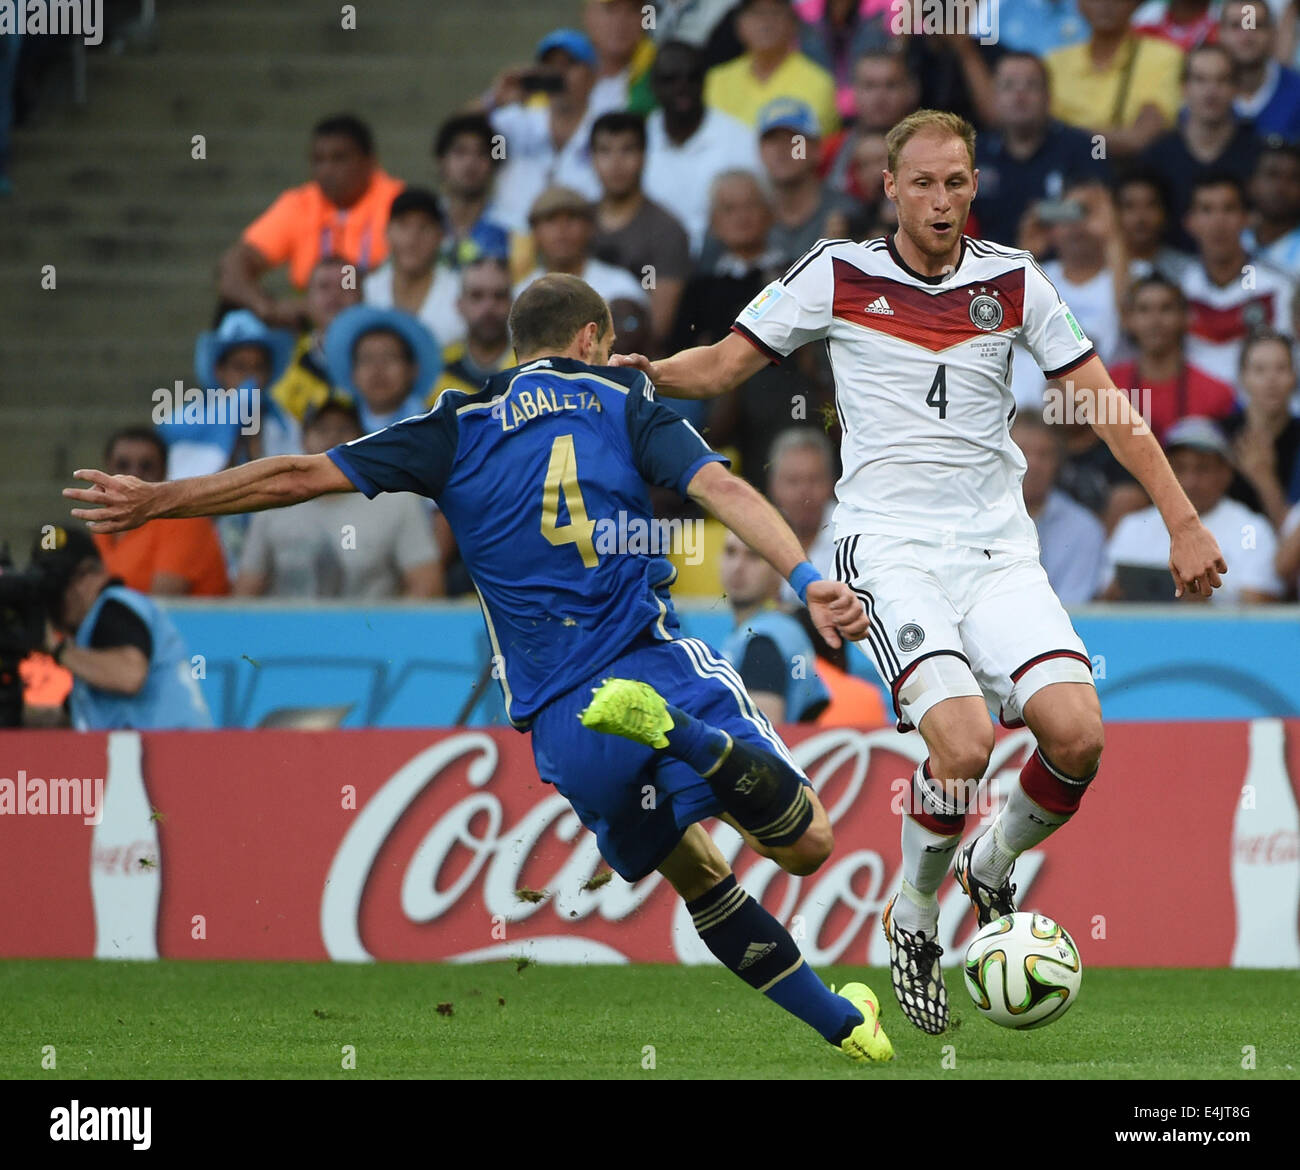 Rio De Janeiro, Brazil. 13th July, 2014. Argentina's Pablo Zabaleta (L) vies with Germany's Benedikt Howedes during the final match between Germany and Argentina of 2014 FIFA World Cup at the Estadio do Maracana Stadium in Rio de Janeiro, Brazil, on July 13, 2014. Credit:  Liu Dawei/Xinhua/Alamy Live News Stock Photo